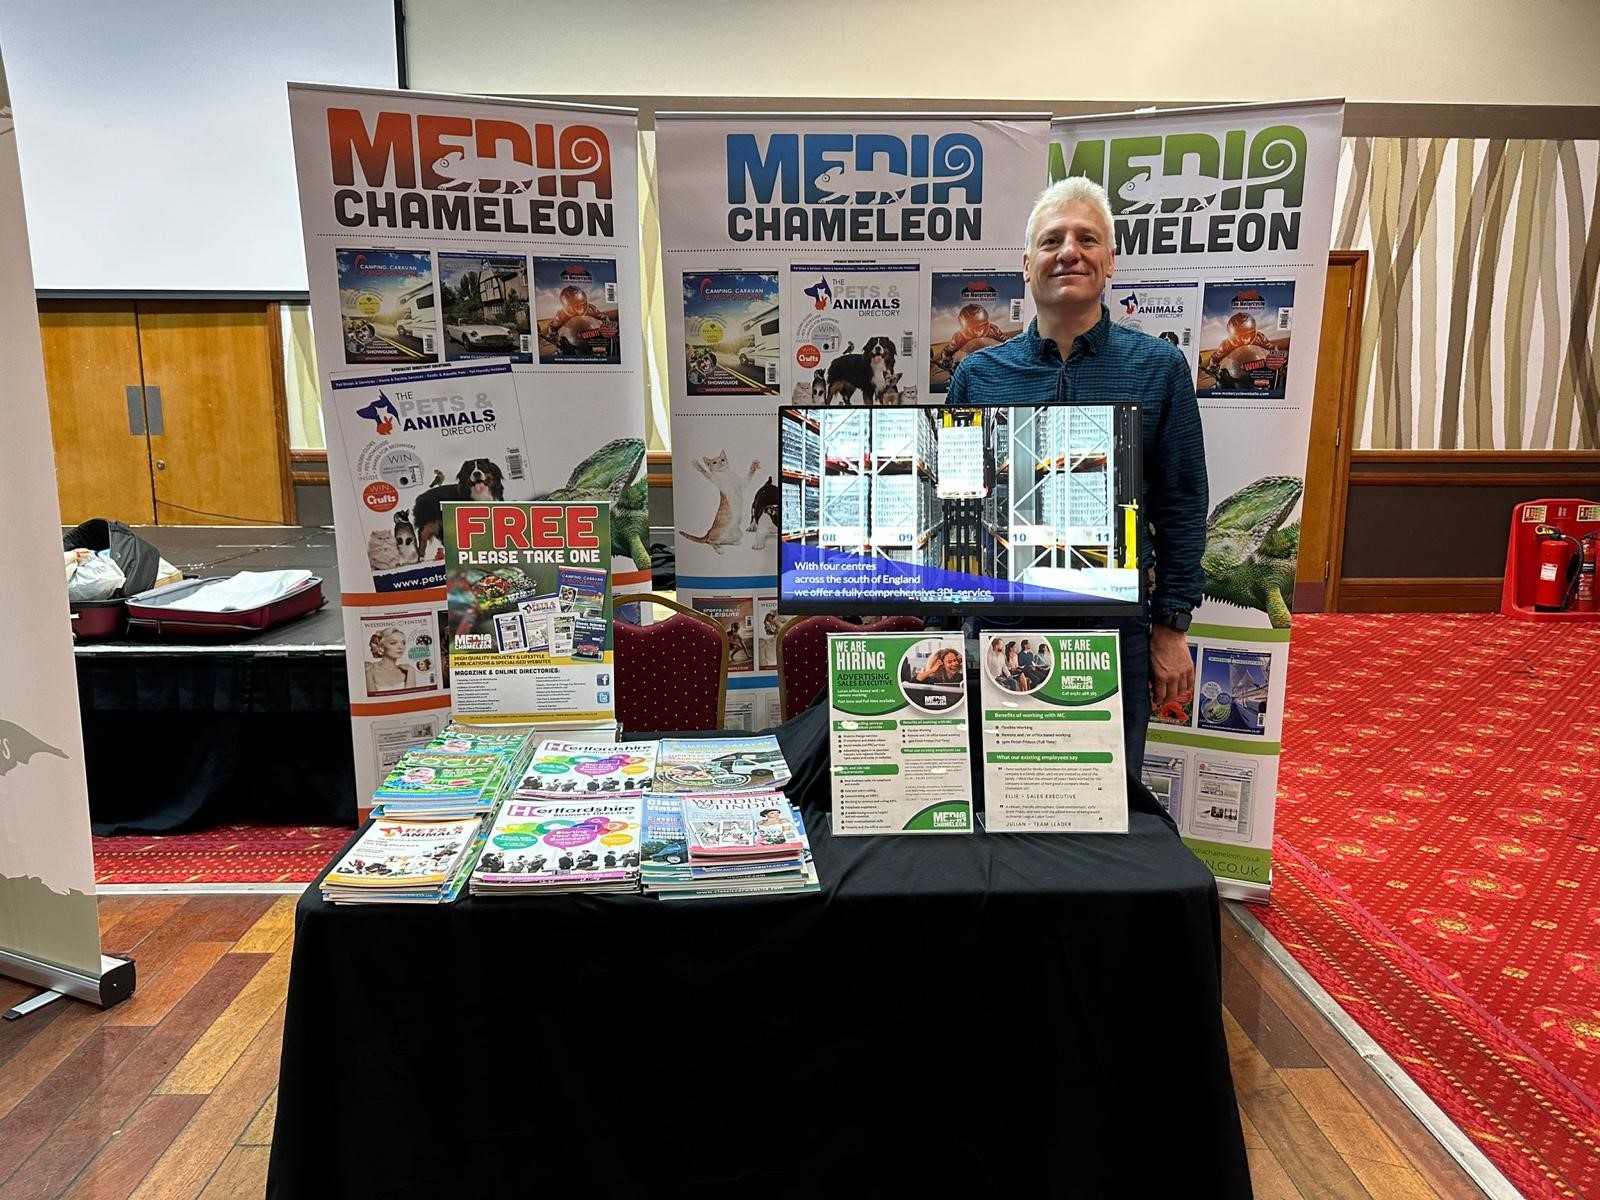 Media Chameleon at our event in Luton